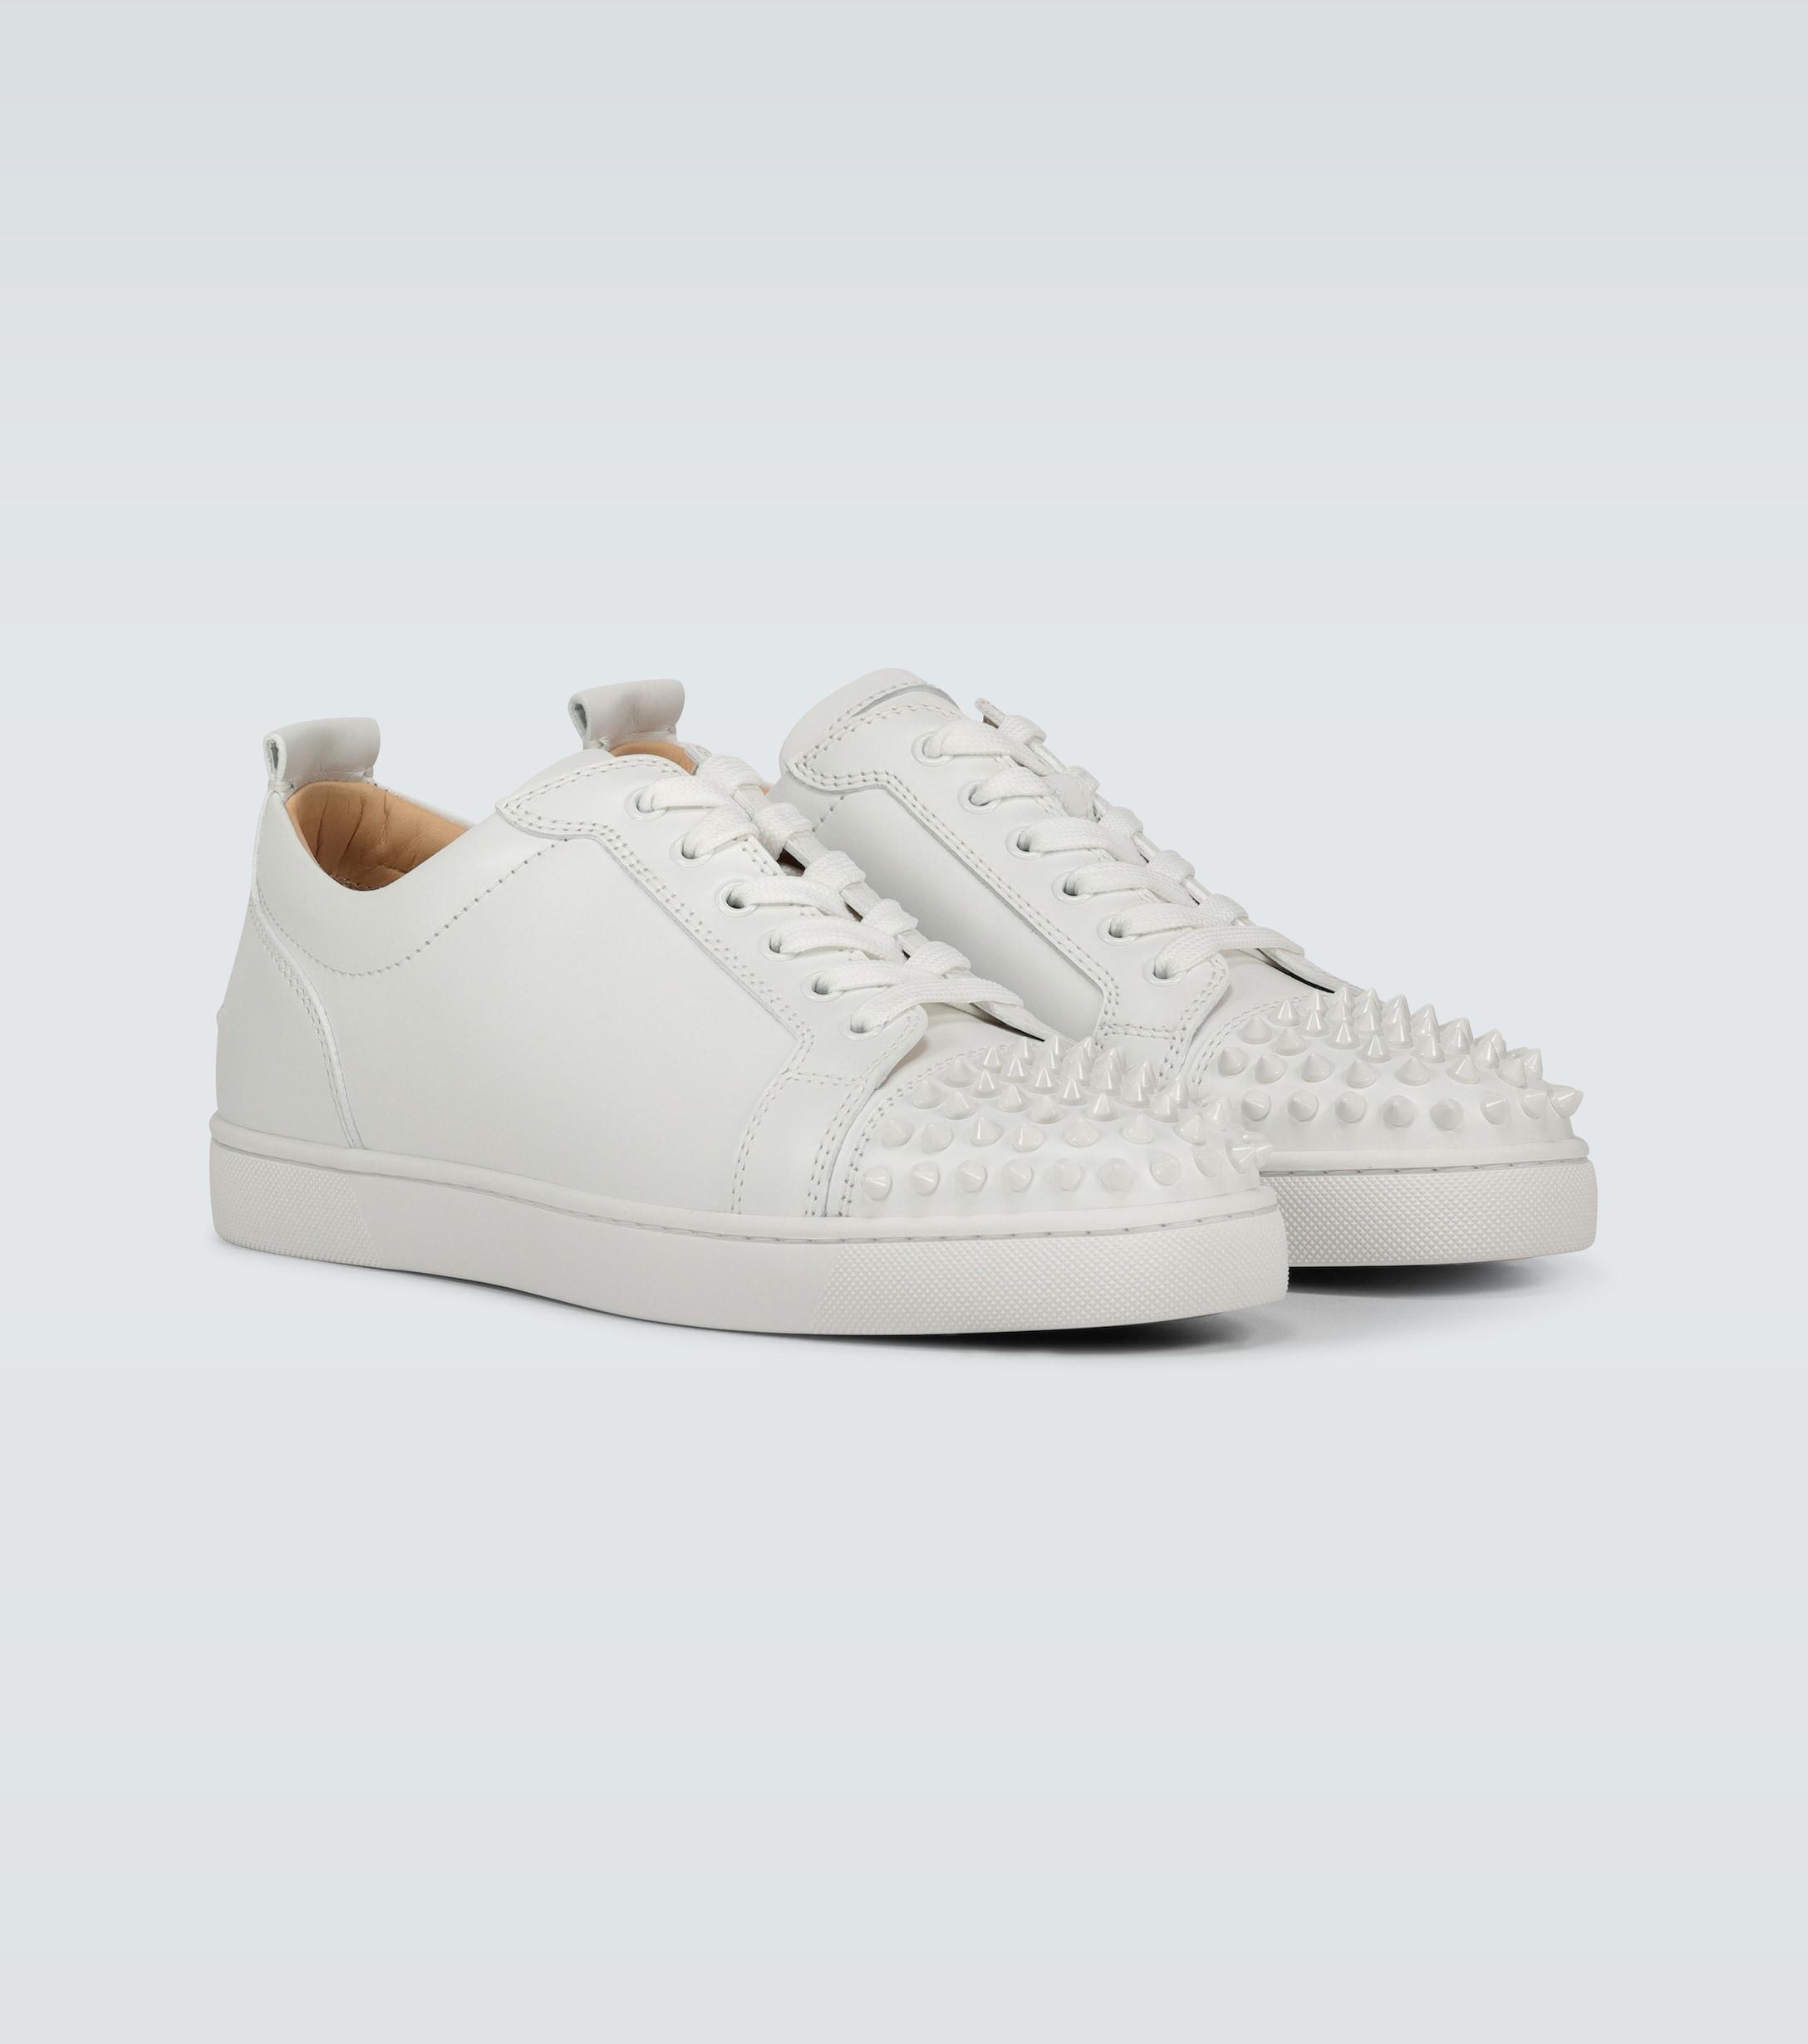 Christian Louboutin Leather Louis Spike-embellished Trainers in White for  Men - Save 56% - Lyst